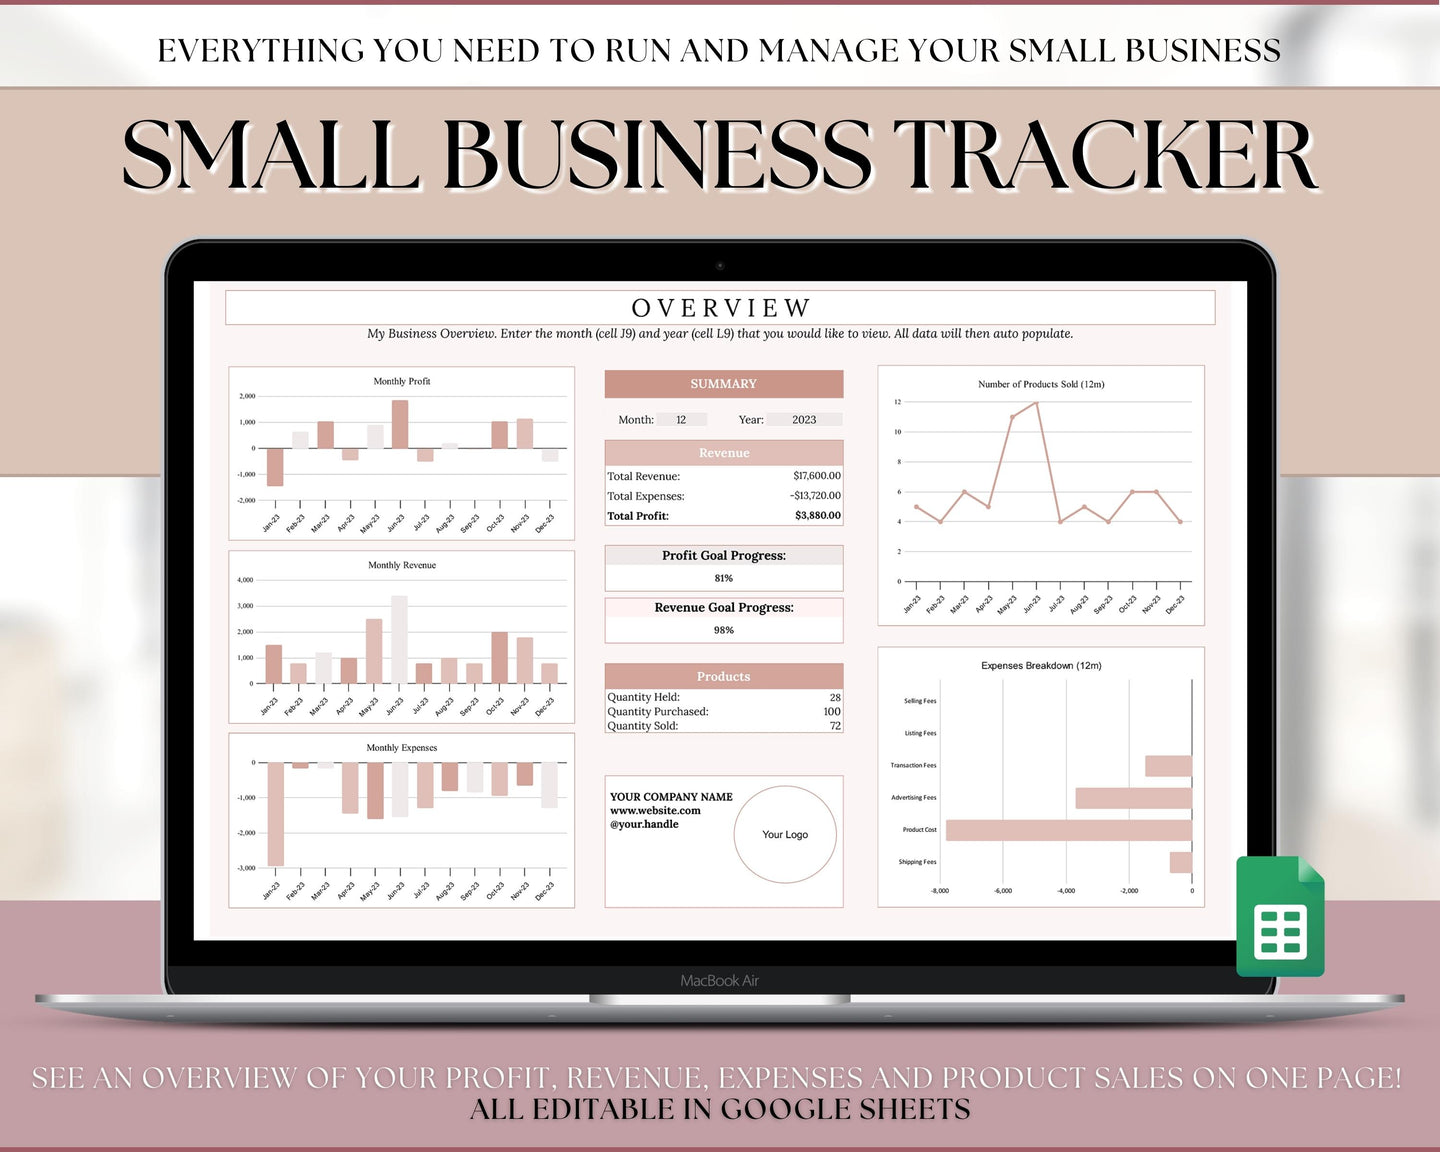 Small Business Bookkeeping Spreadsheet | Google Sheets Automated Business Expense Tracker & Product Invetory Tracker | Lux